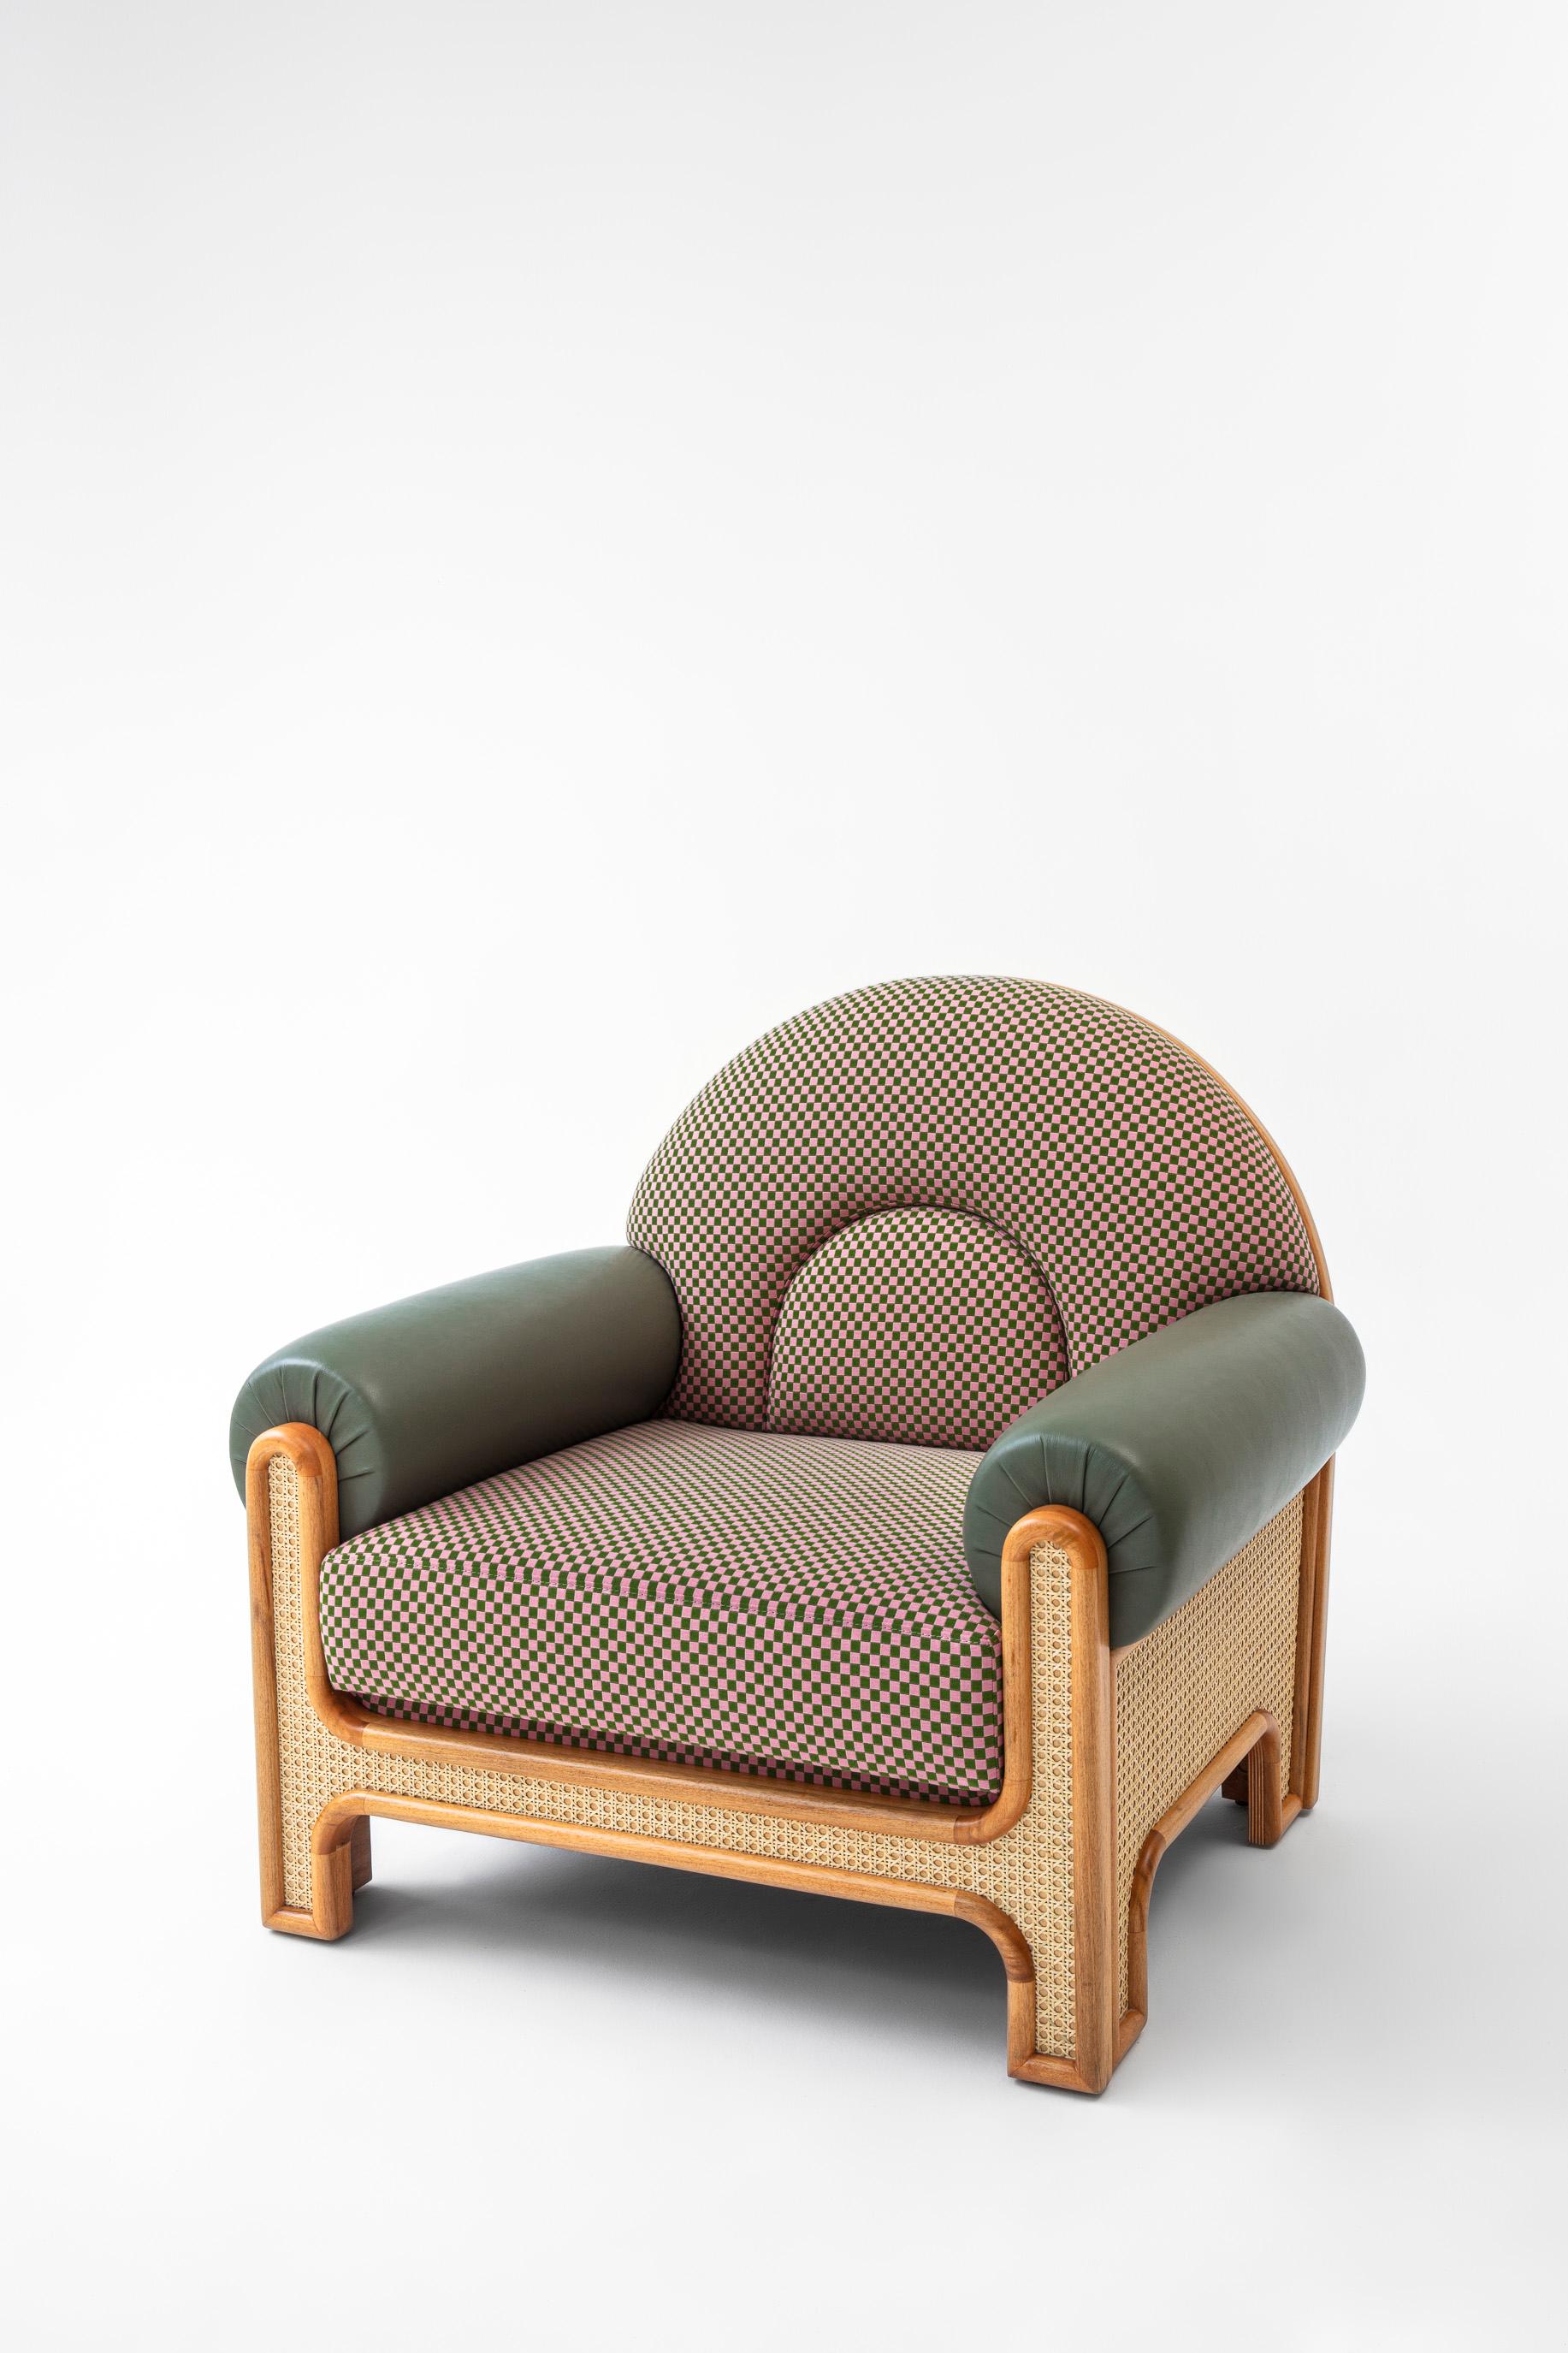 The N-gene armchair is a reinterpretation of an armchair designed by Merve’s uncle, interior designer, Engin, in the 1970s. The N-Gene is re-envisioned with caning, and is upholstered in a checker textile with black leather arms. This entirely